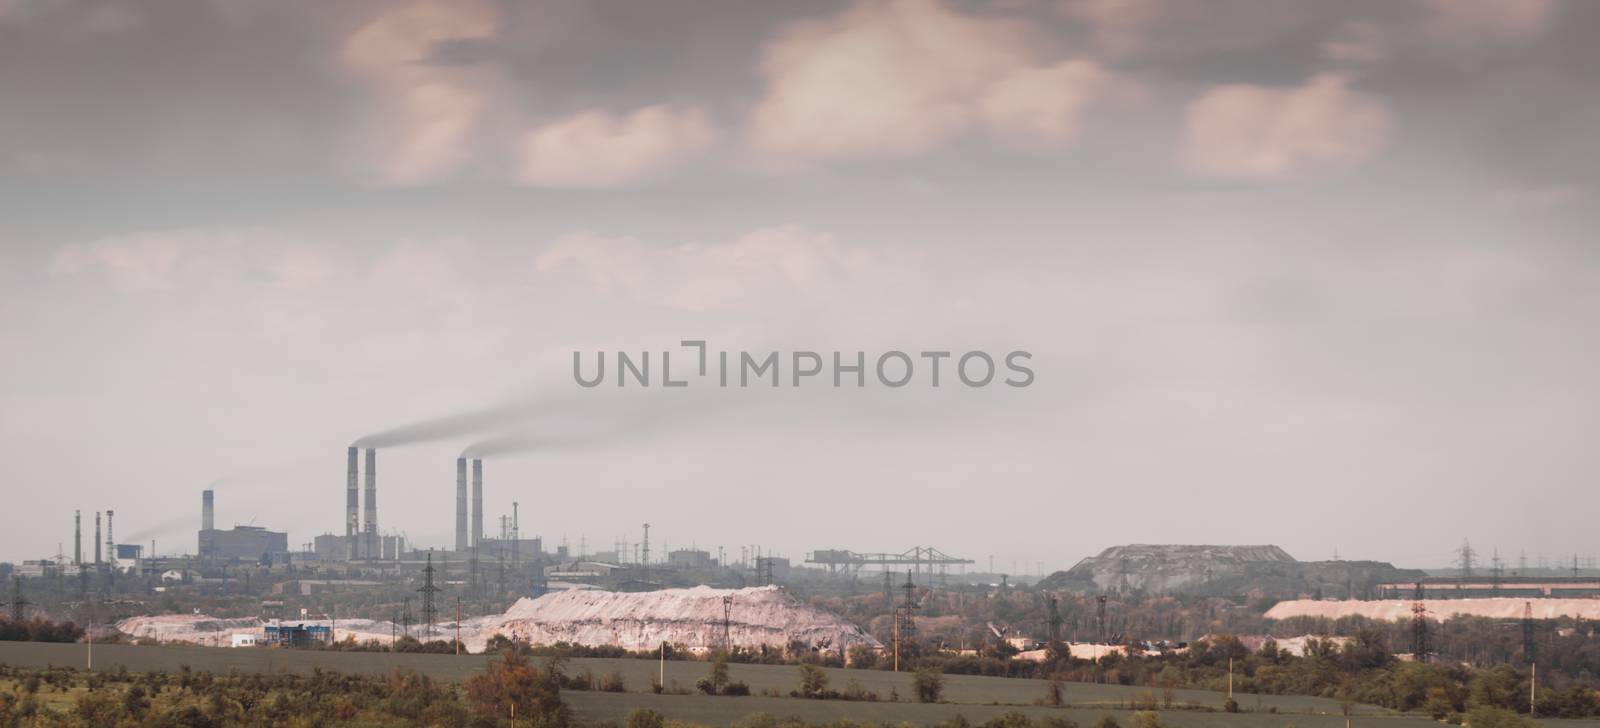 panorama view of the factory with smoking chimneys and the sky with clouds in Ukraine